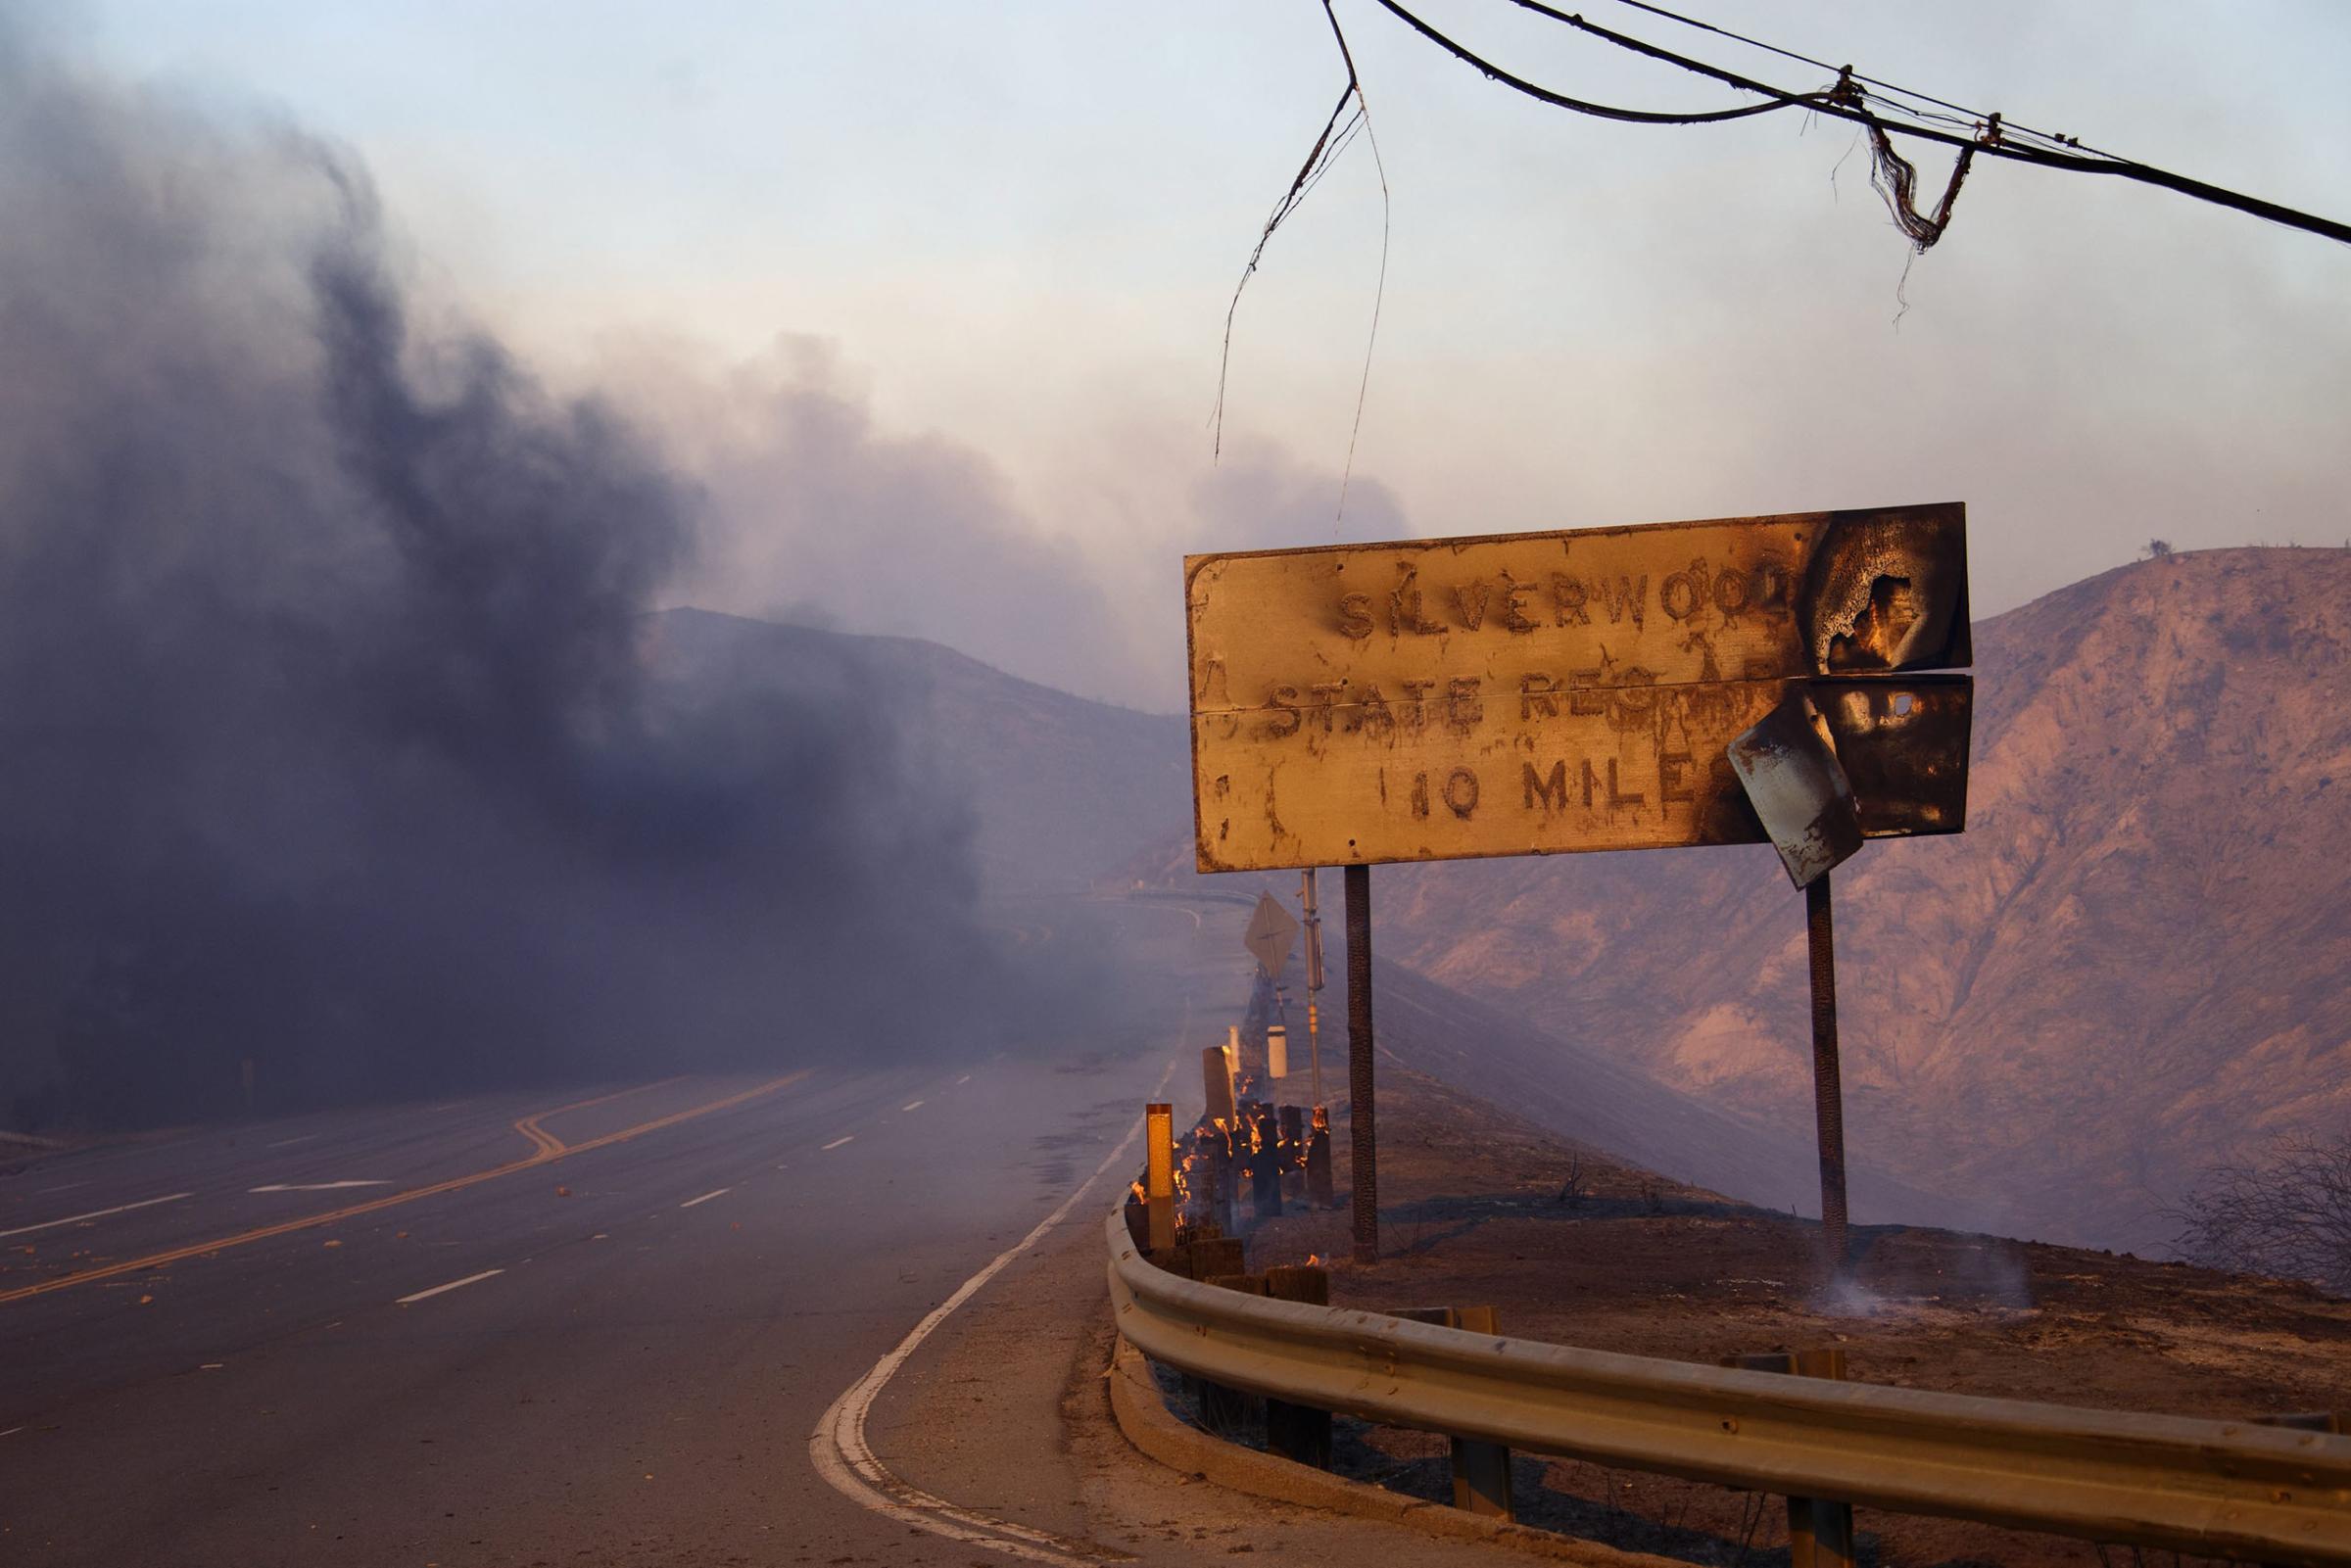 A melted sign shows the damage after a wildfire swept through Cajon Junction, Calif., Aug. 16, 2016.